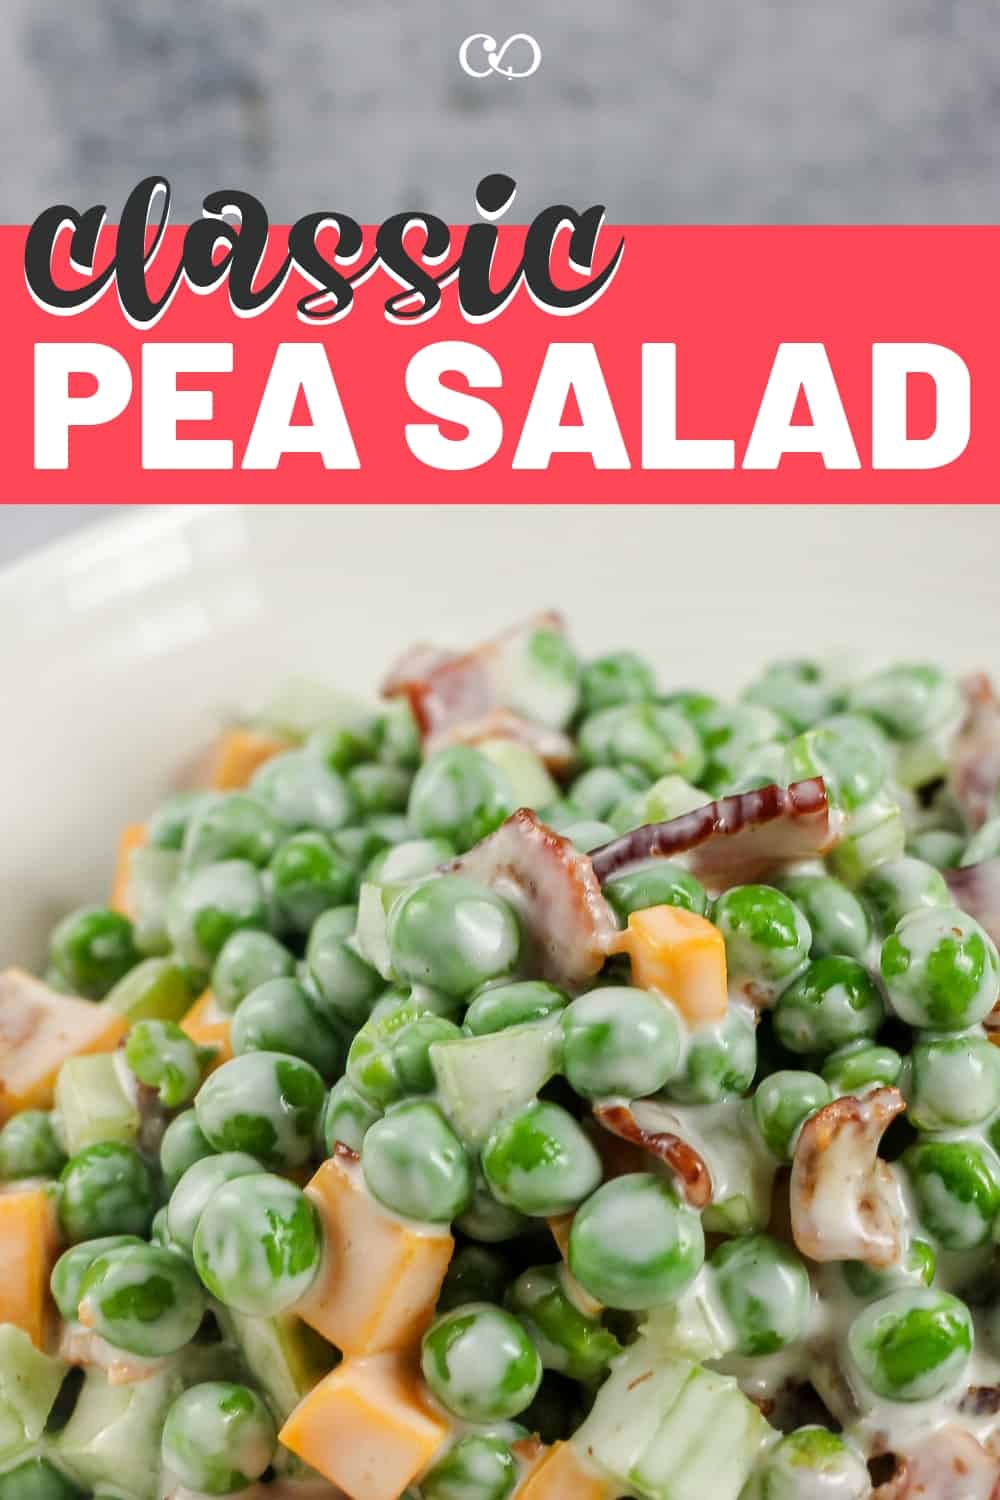 This creamy, cold Pea Salad with bacon is an easy recipe your family is going to love.  #cheerfulcook #oldfashioned #withbacon #classicsalad #salad ♡ cheerfulcook.com  via @cheerfulcook